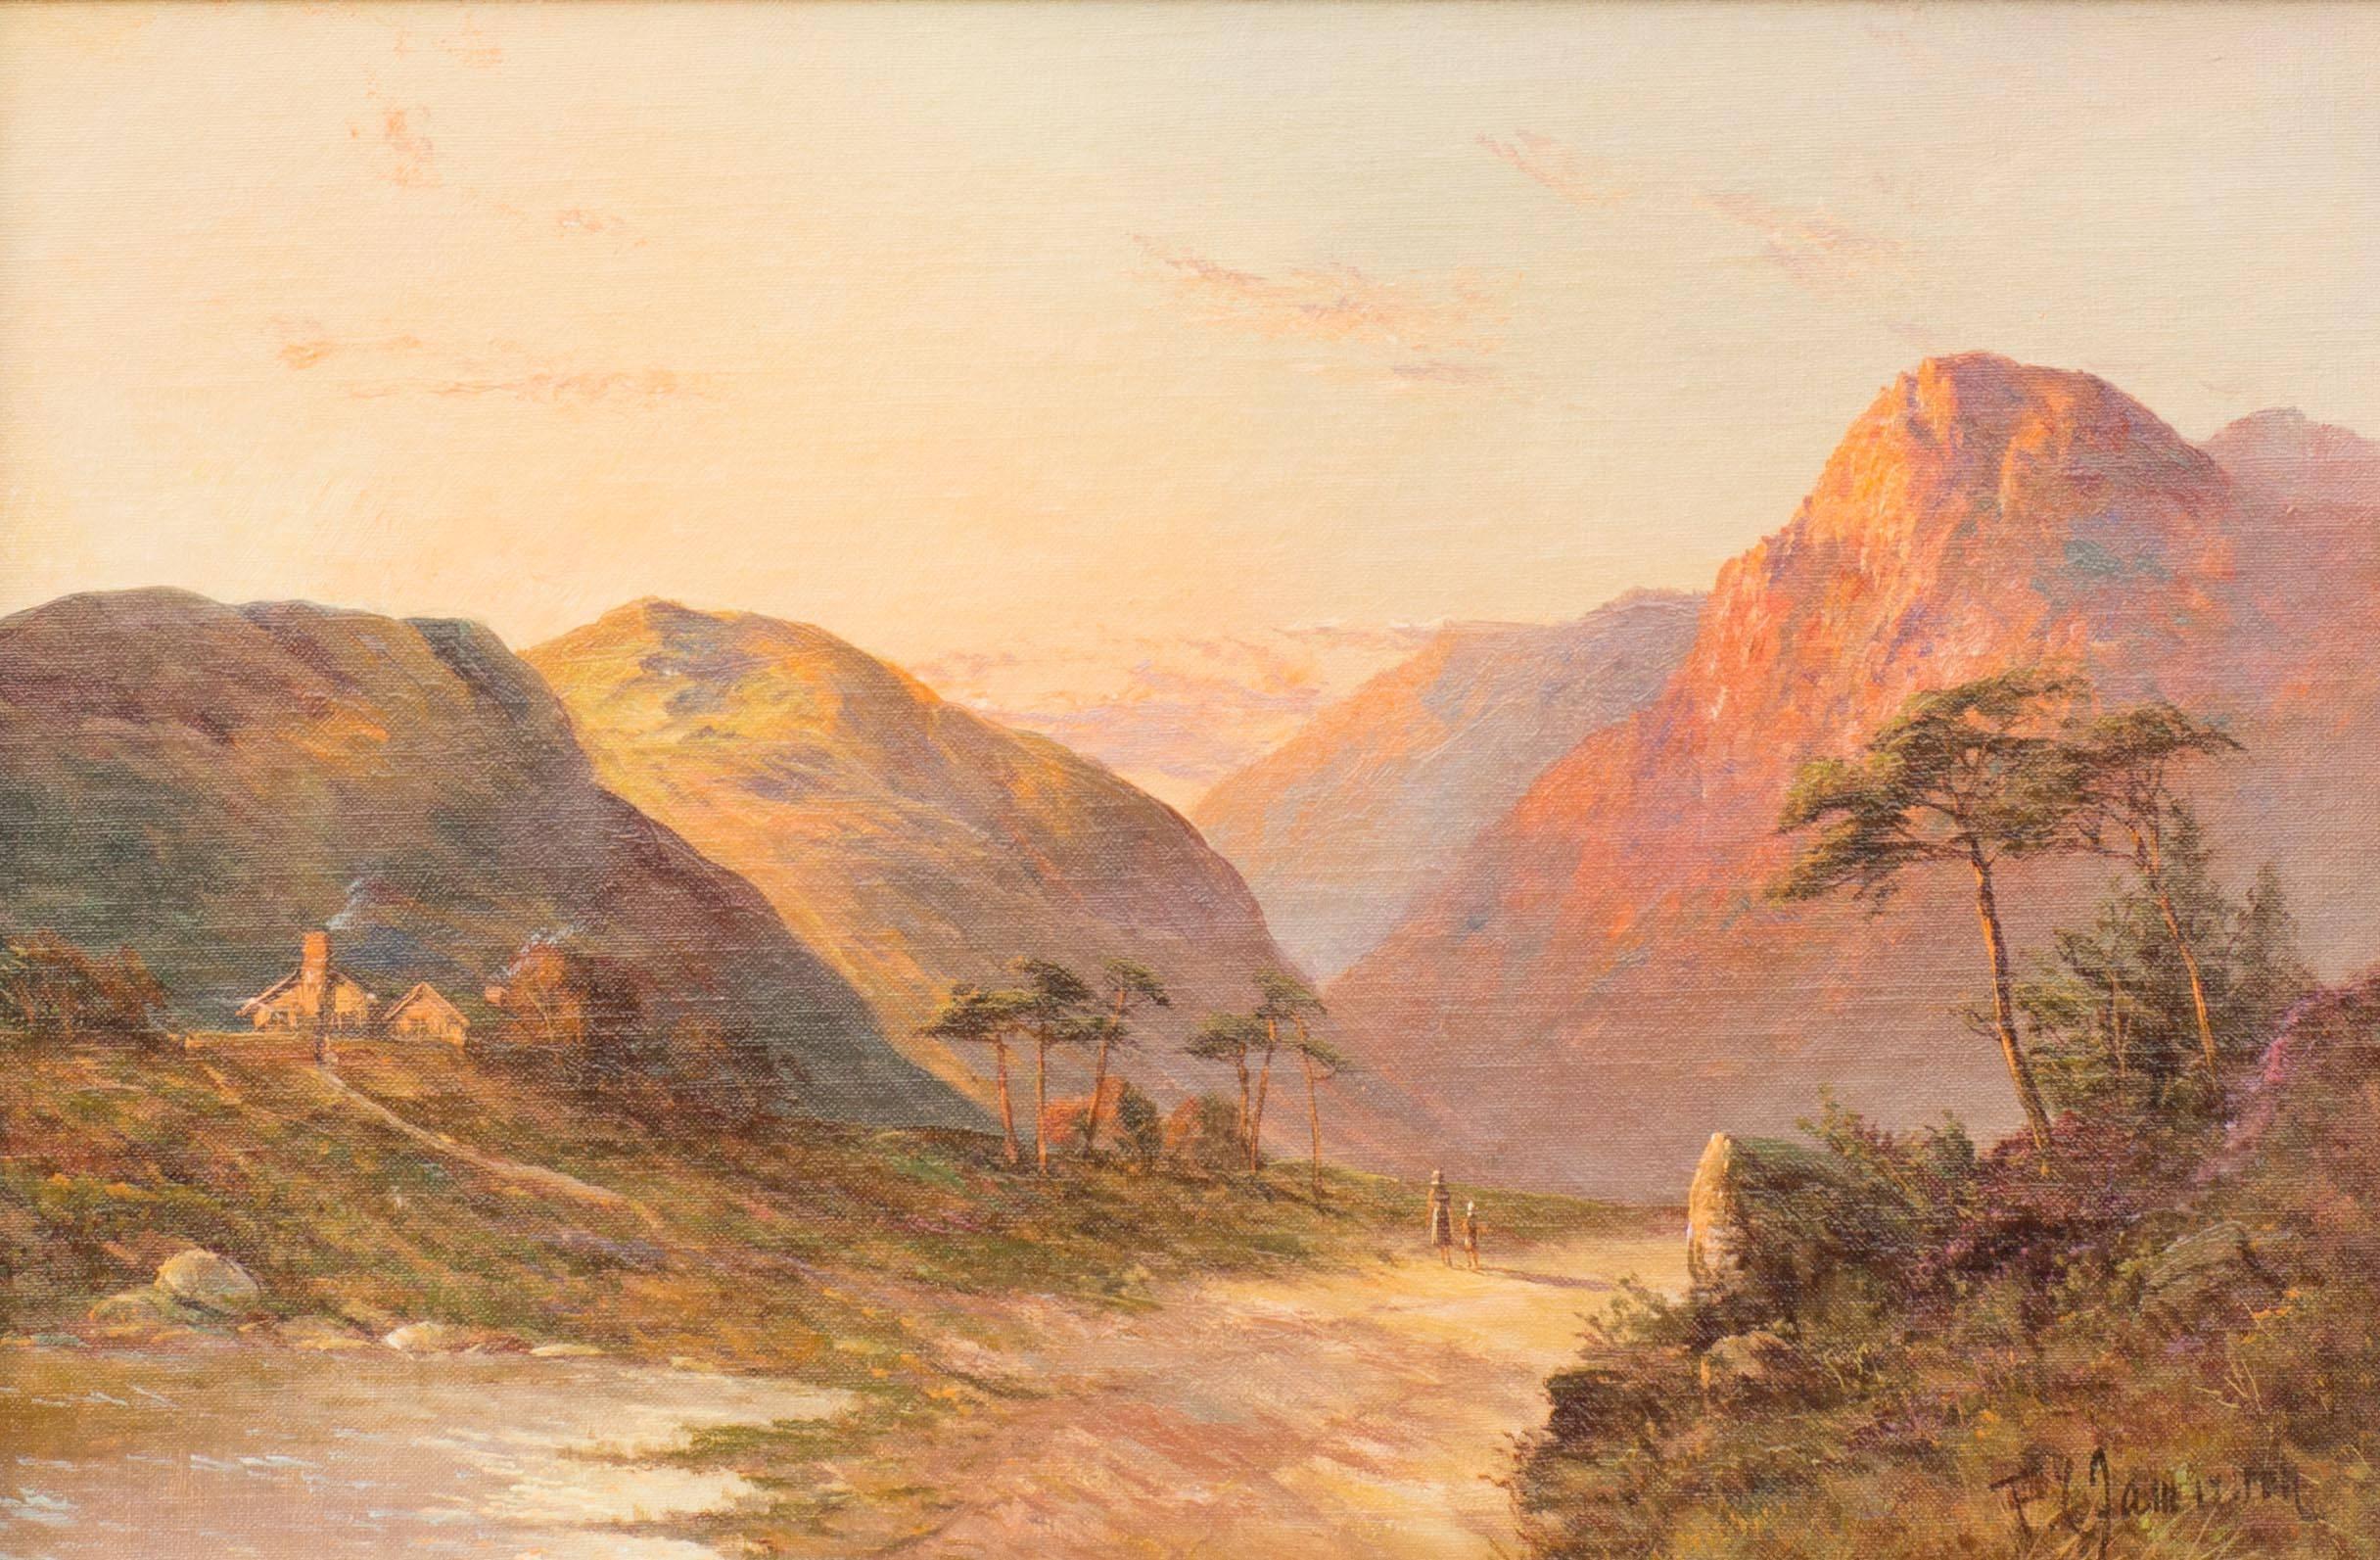 The Old Road, Glencoe, Original Oil On Canvas Painting - Beige Landscape Painting by Francis E. Jamieson